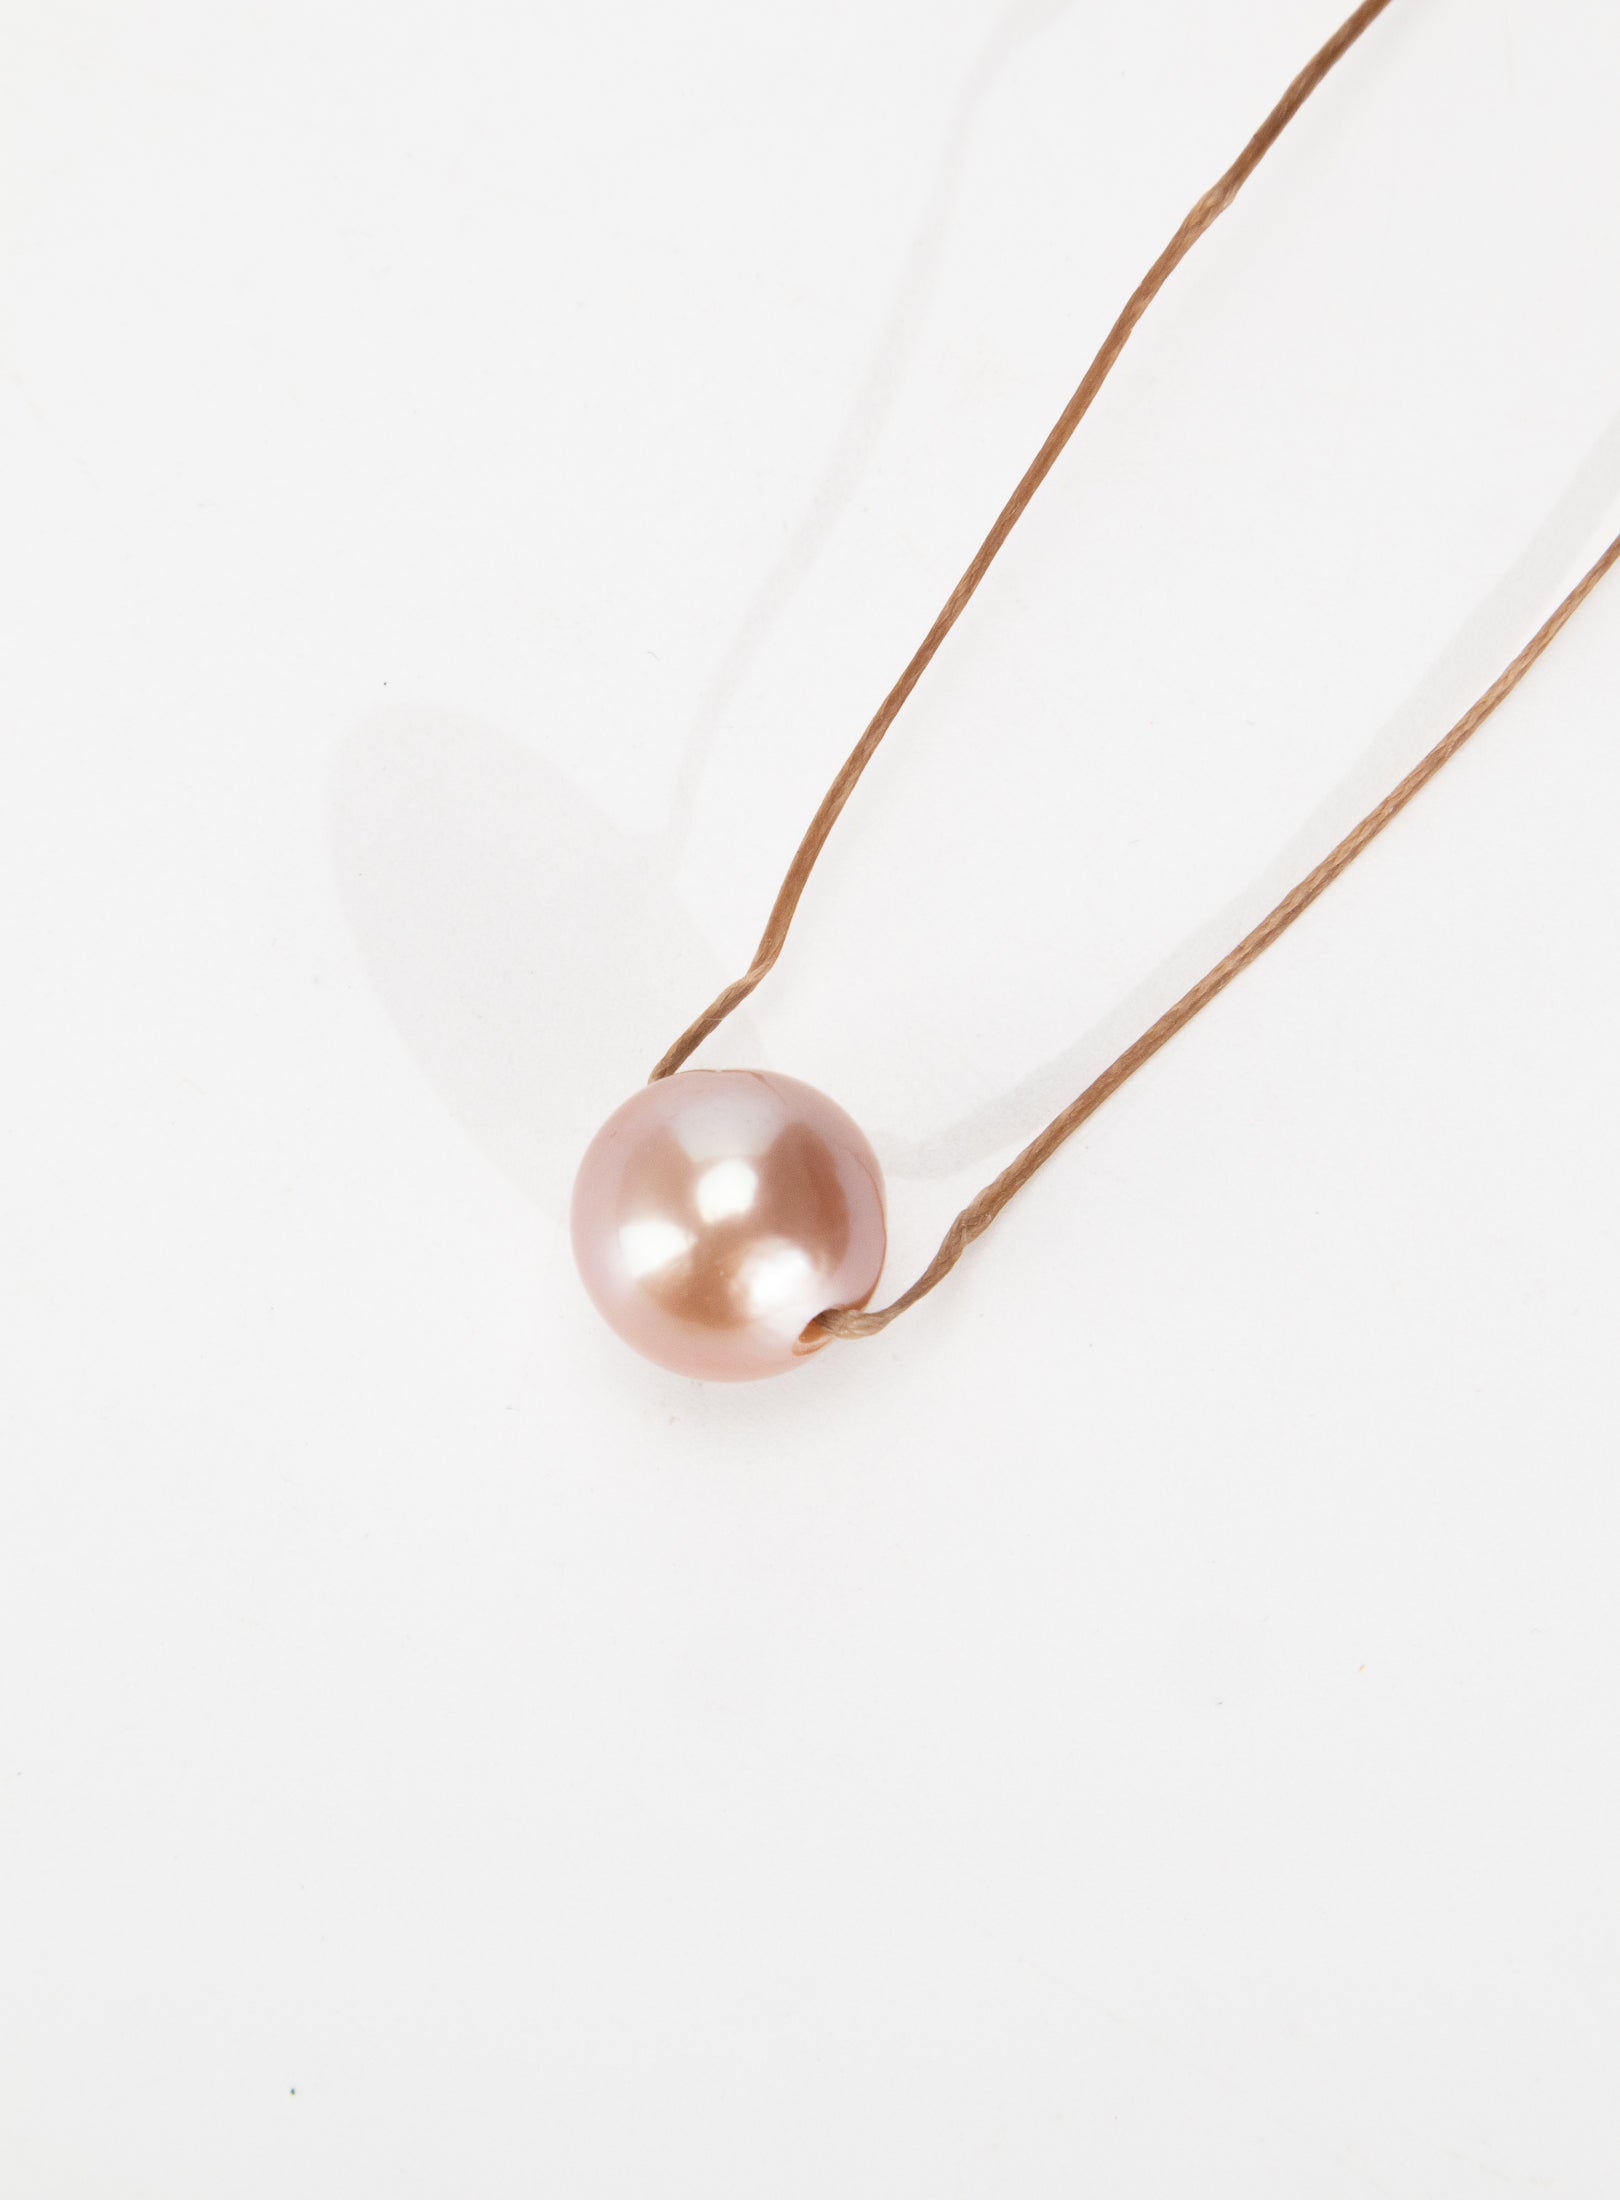 For Mum, you are a real pearl - Hazelnut Necklace